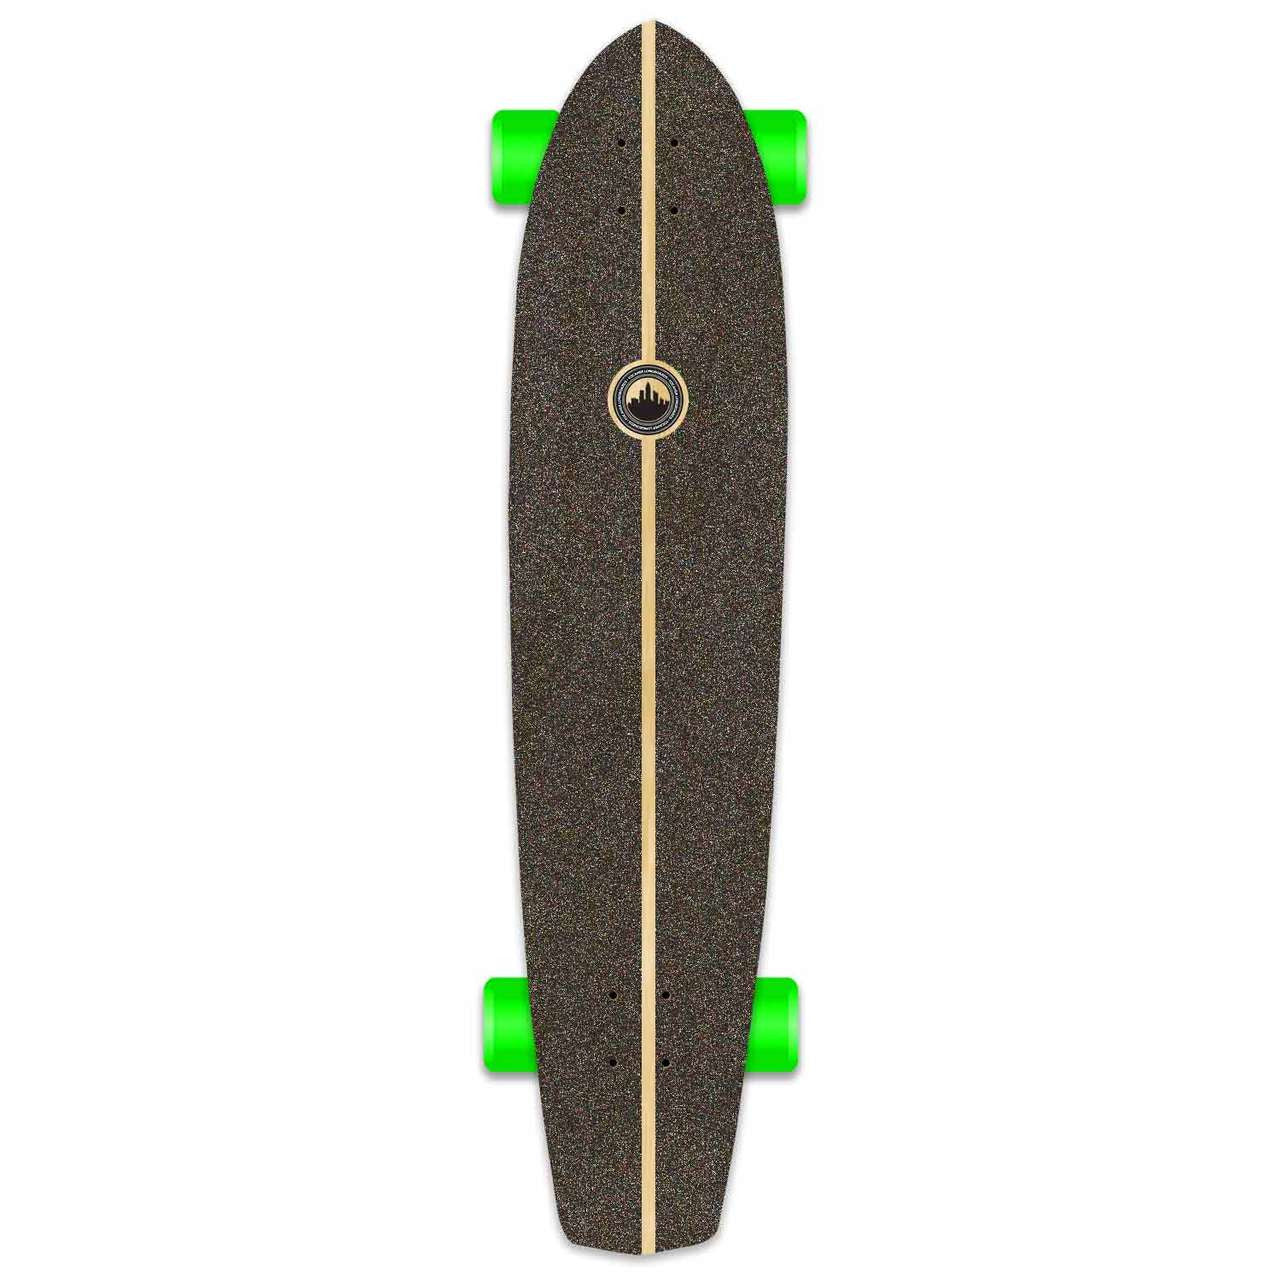 Yocaher Slimkick Longboard Complete - Stained Black